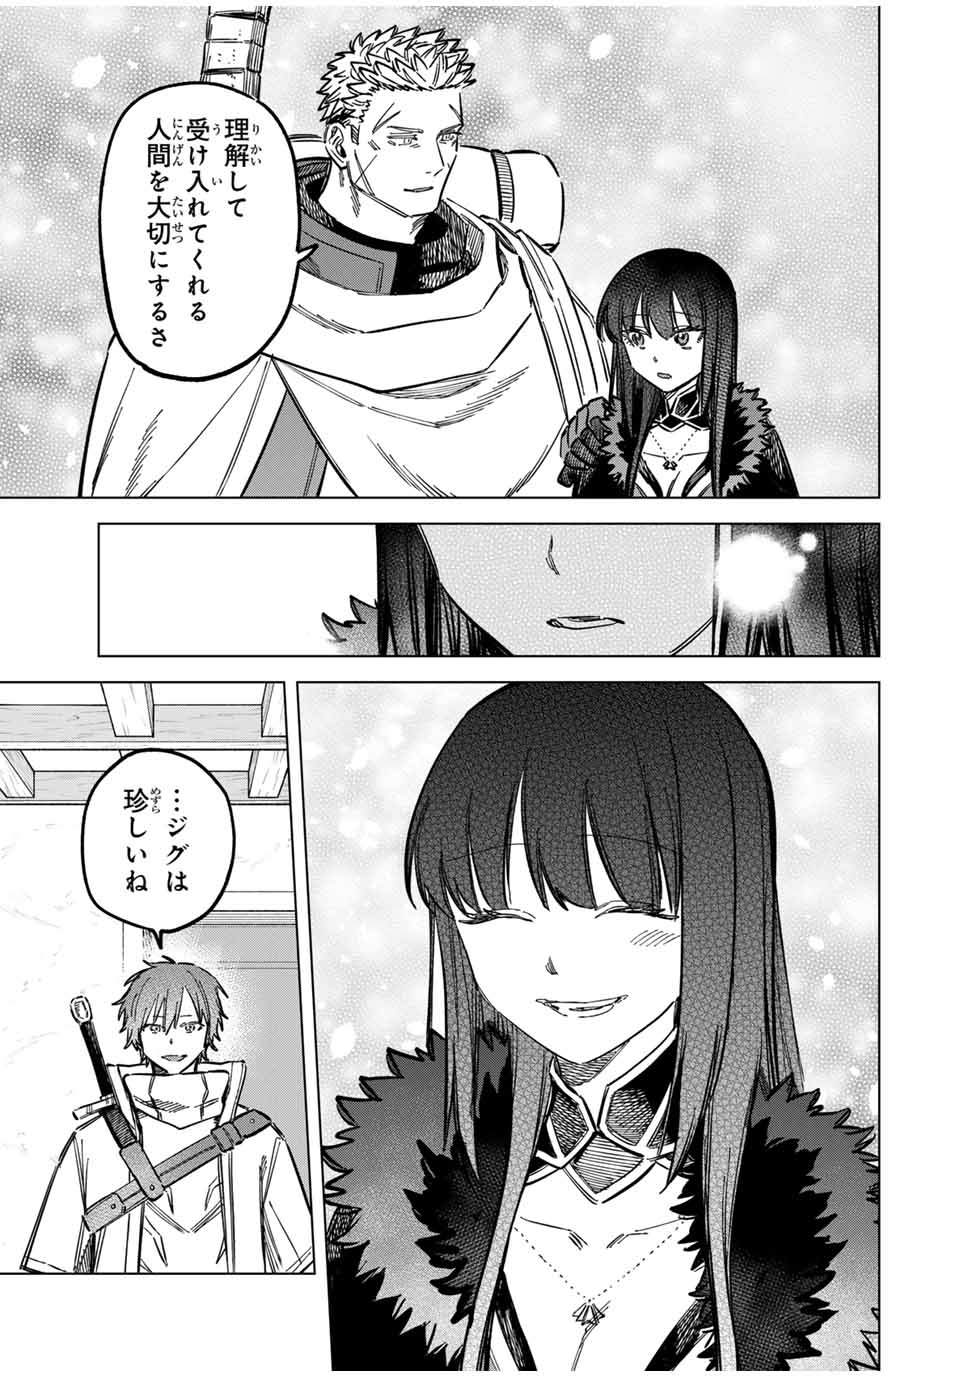 Witch and Mercenary 魔女と傭兵 第16話 - Page 7